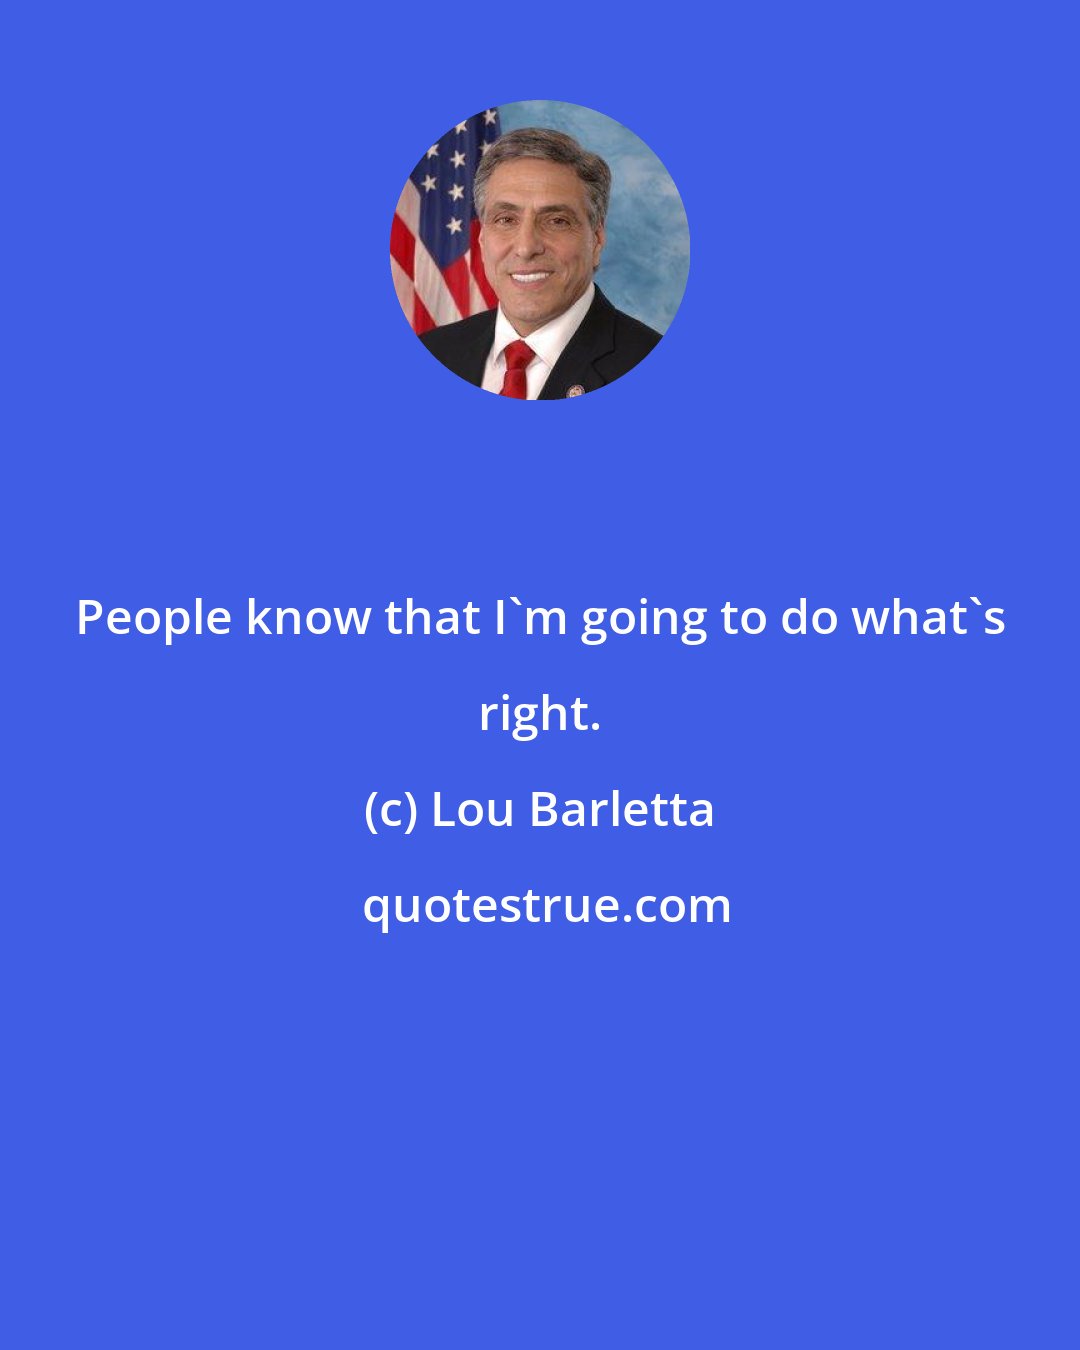 Lou Barletta: People know that I'm going to do what's right.